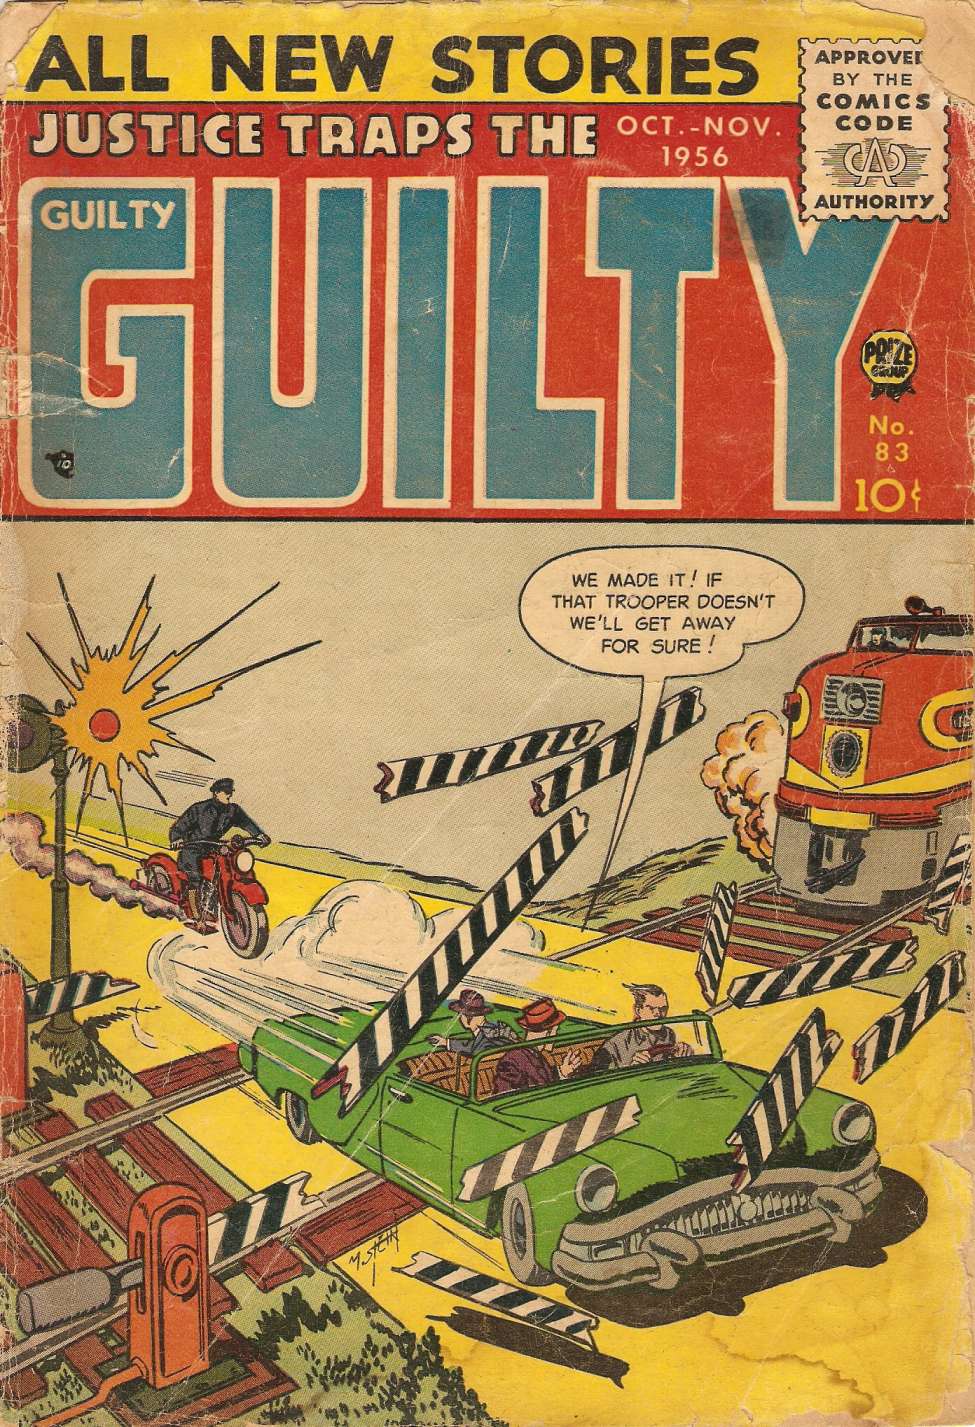 Comic Book Cover For Justice Traps the Guilty 83 (alt)